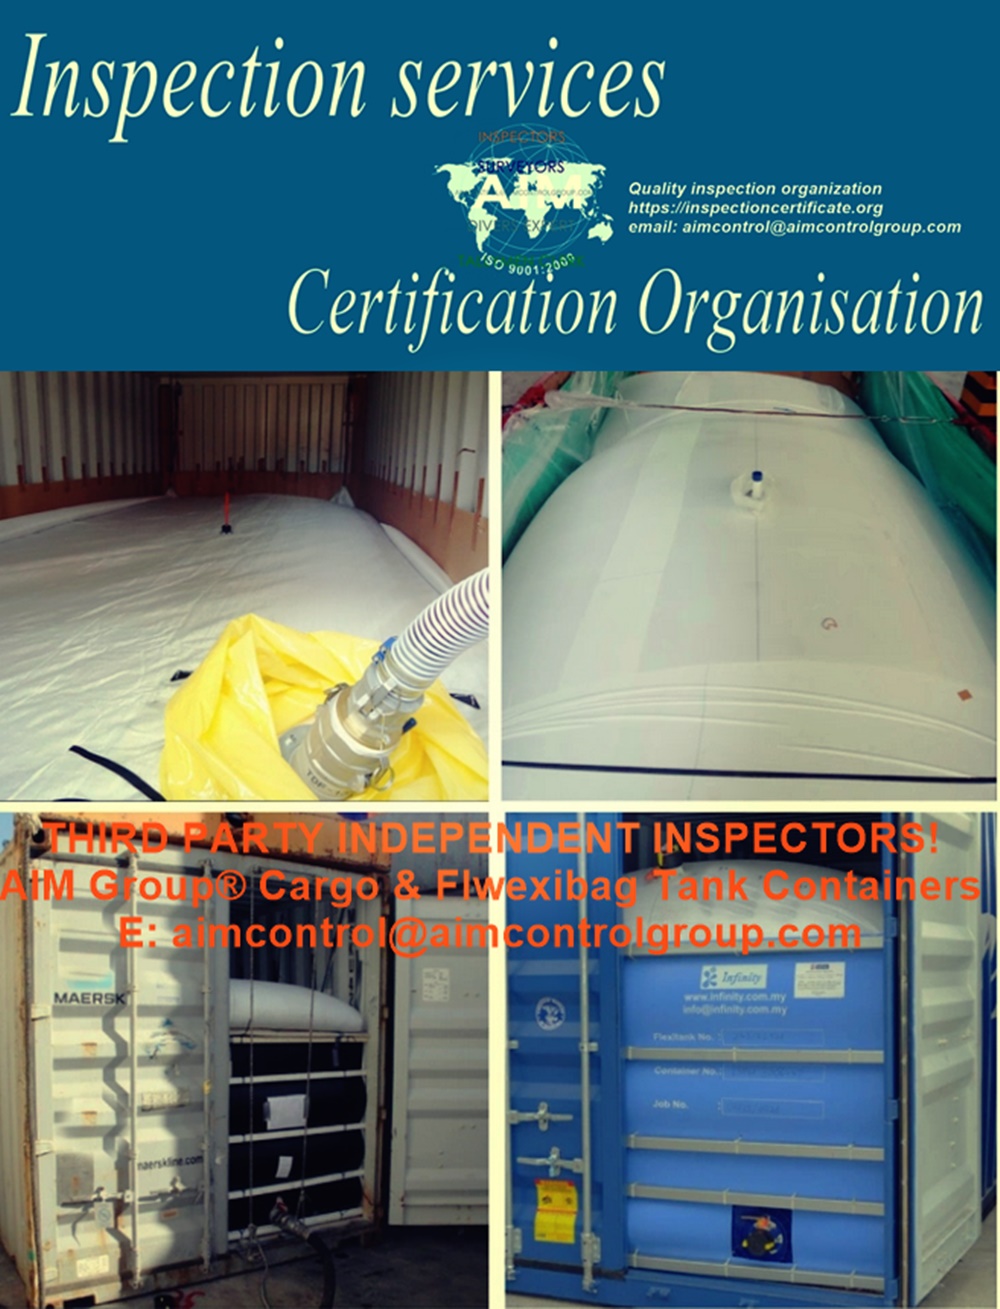 Flwexibag_Container_and_Cargo_inspection_services